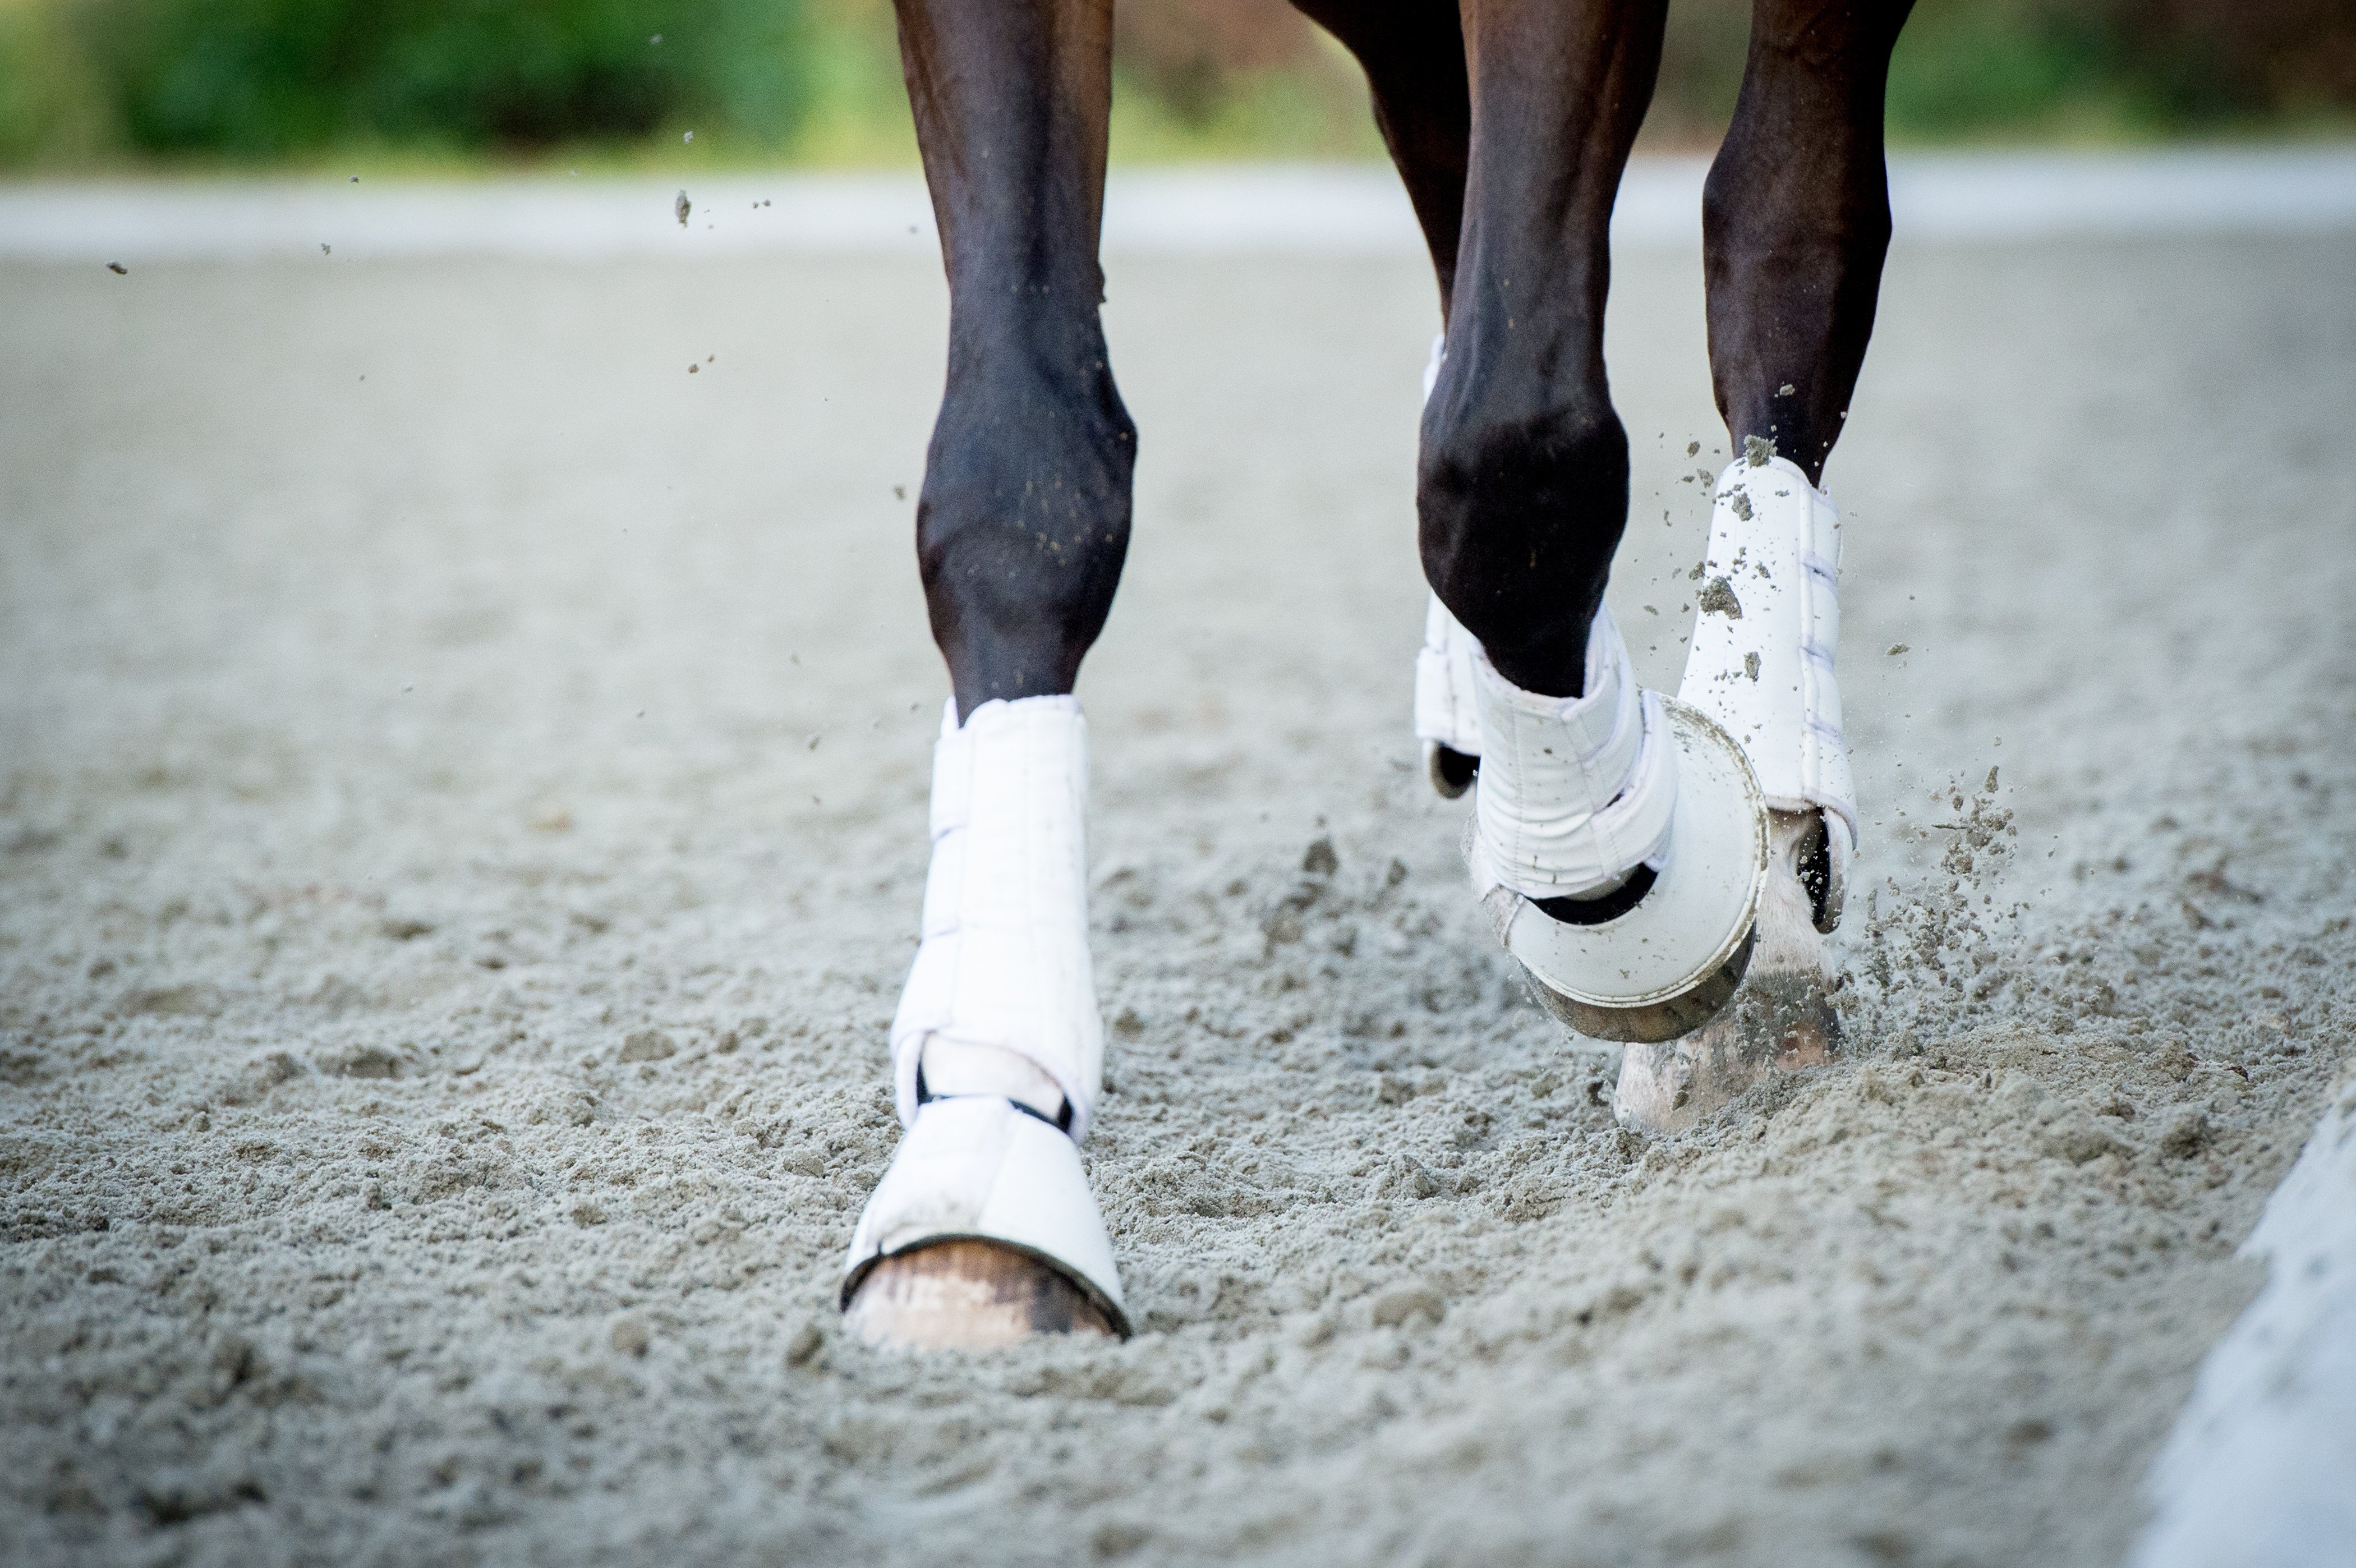 horse hooves on a riding arena floor